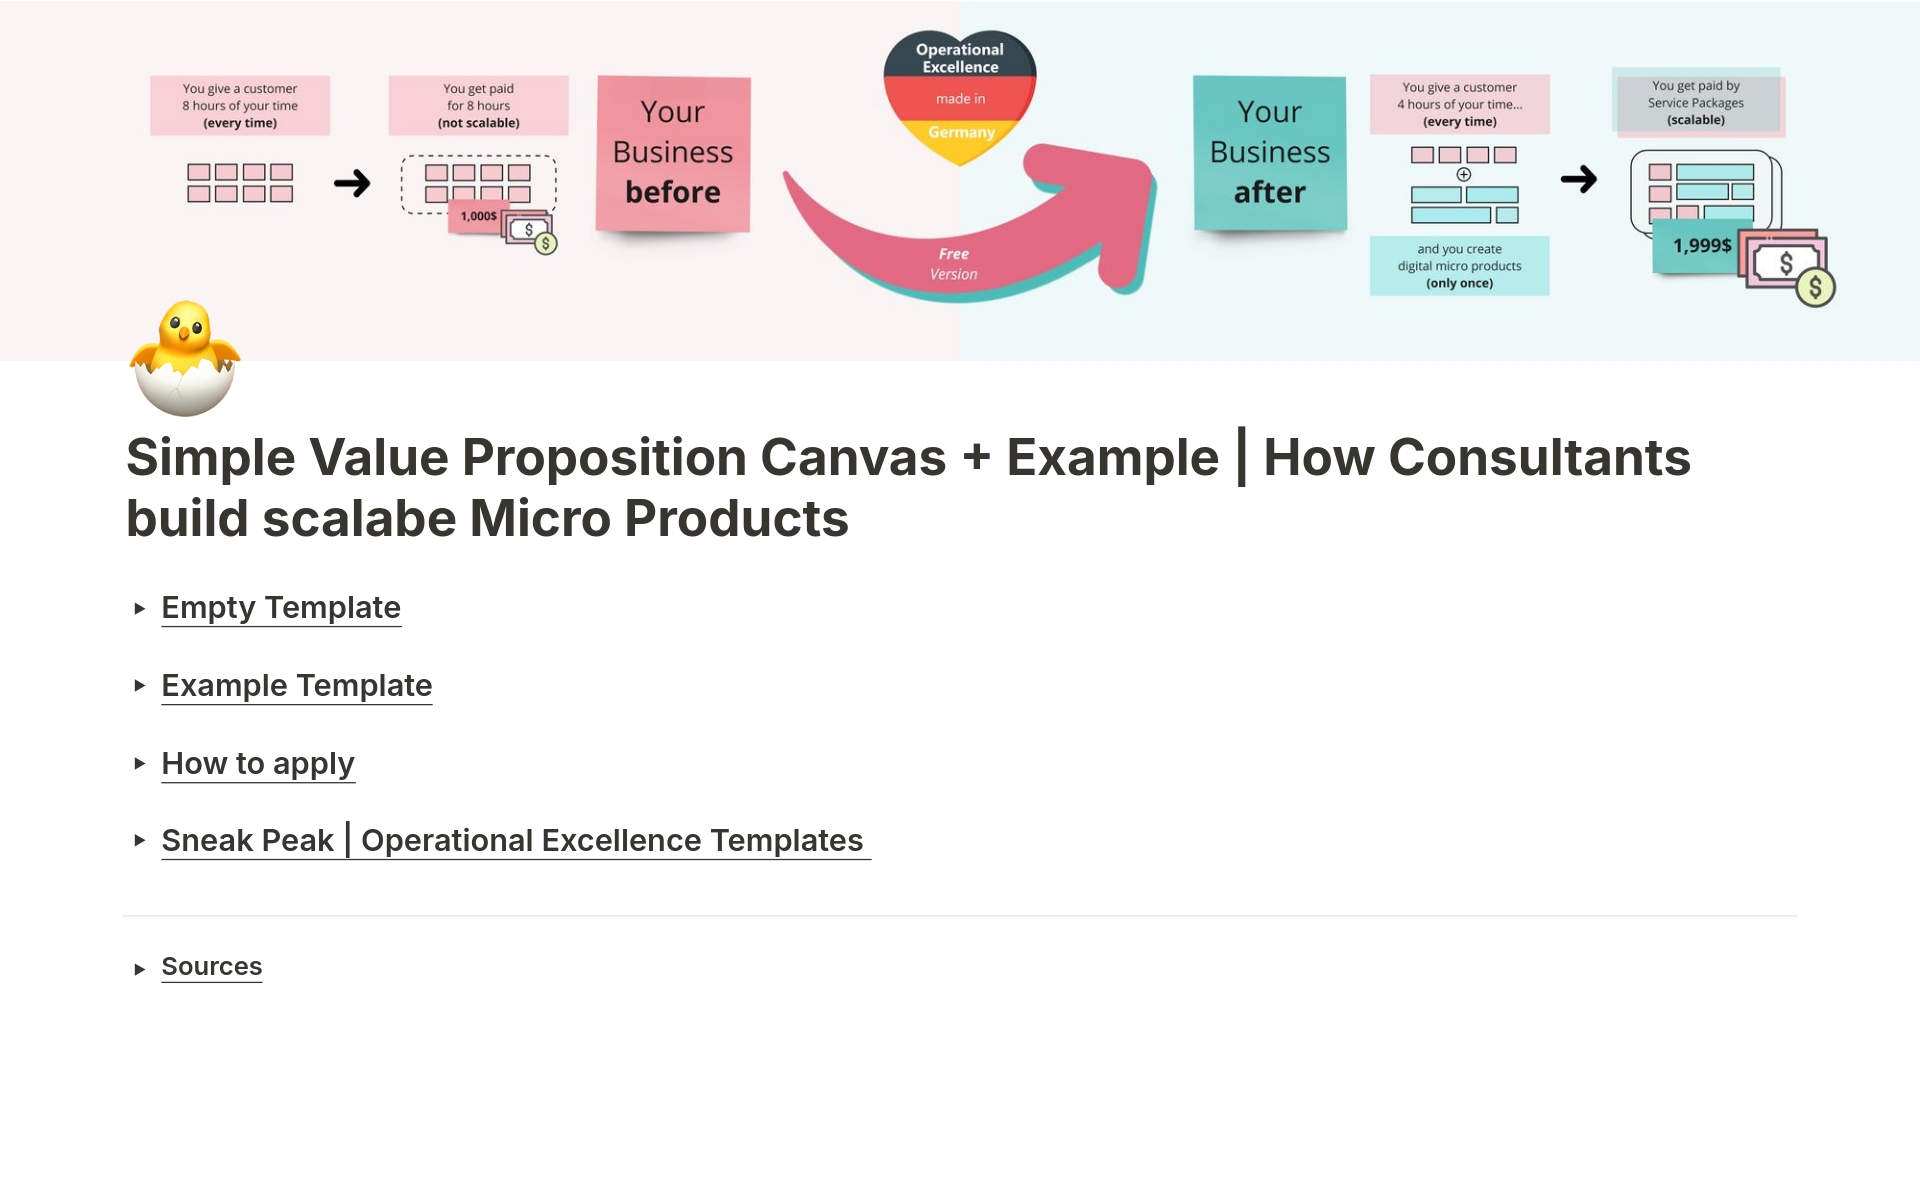 This quality template helps consultants & agencies to build scalabe Micro Products|
Easy to use, hard to master. Simple Value Proposition Canvas + Example |